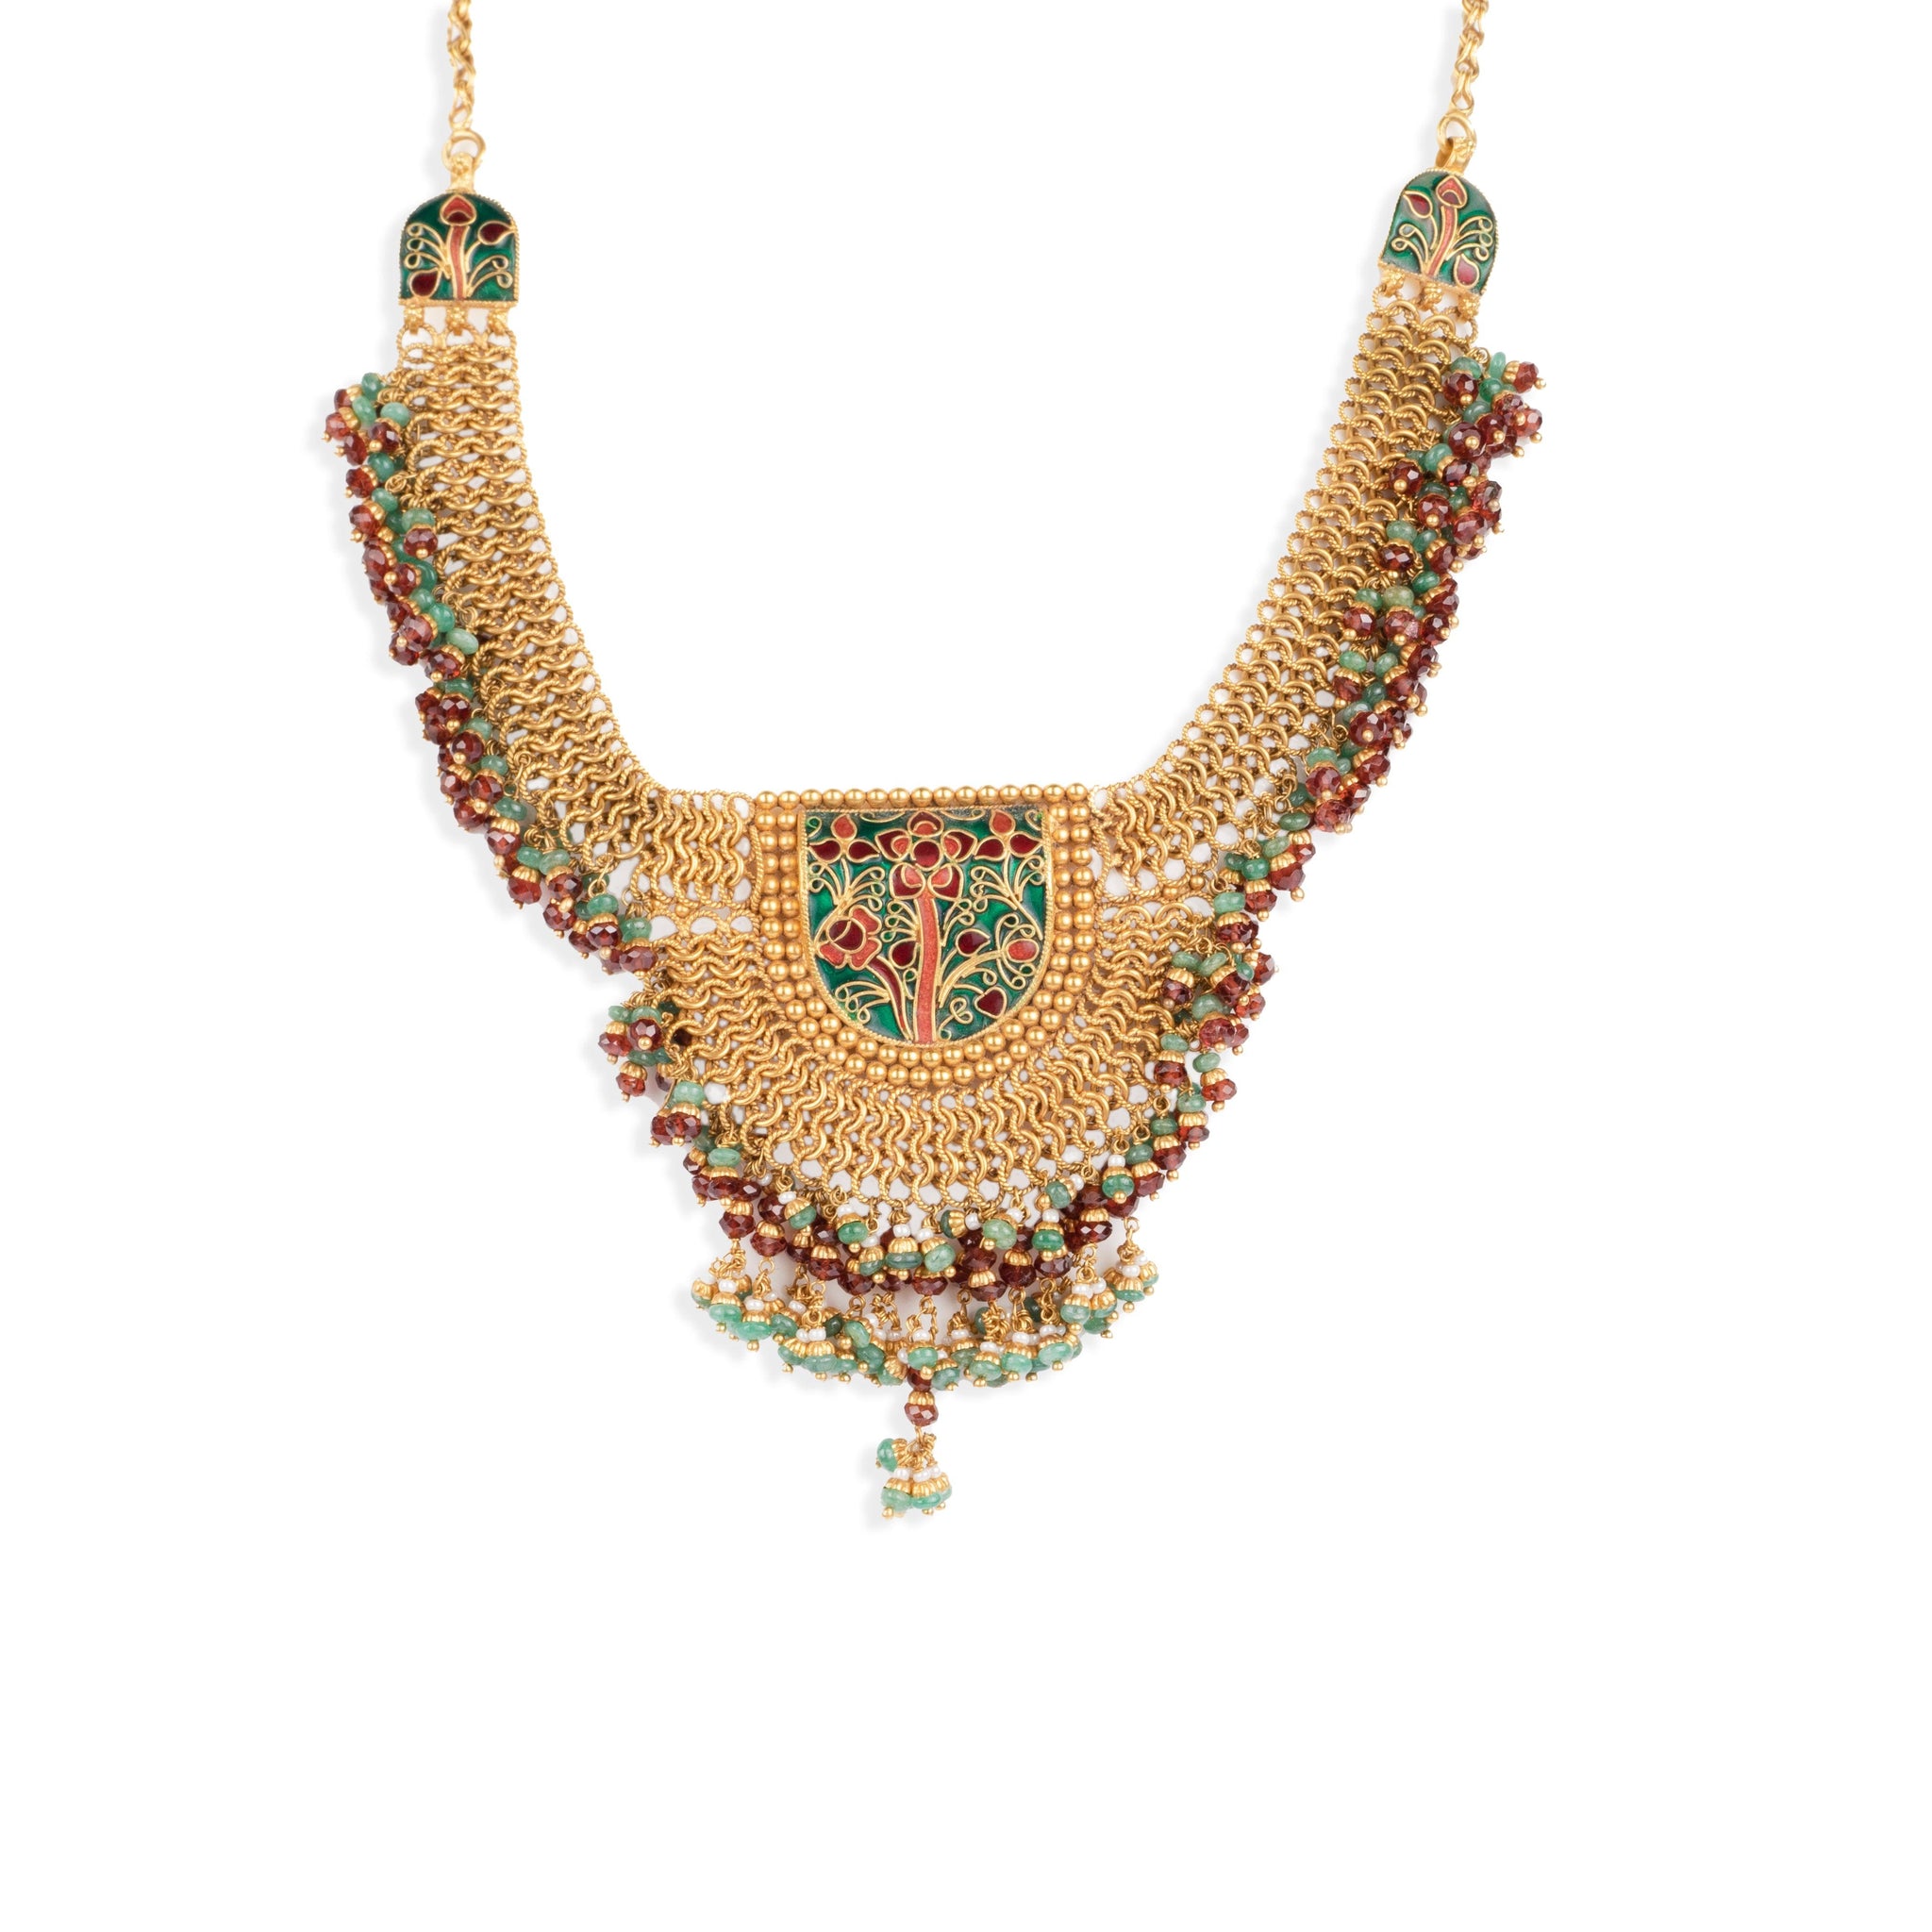 22ct Gold Meenakari style Necklace and Earrings set (94.5g) N&E-3677